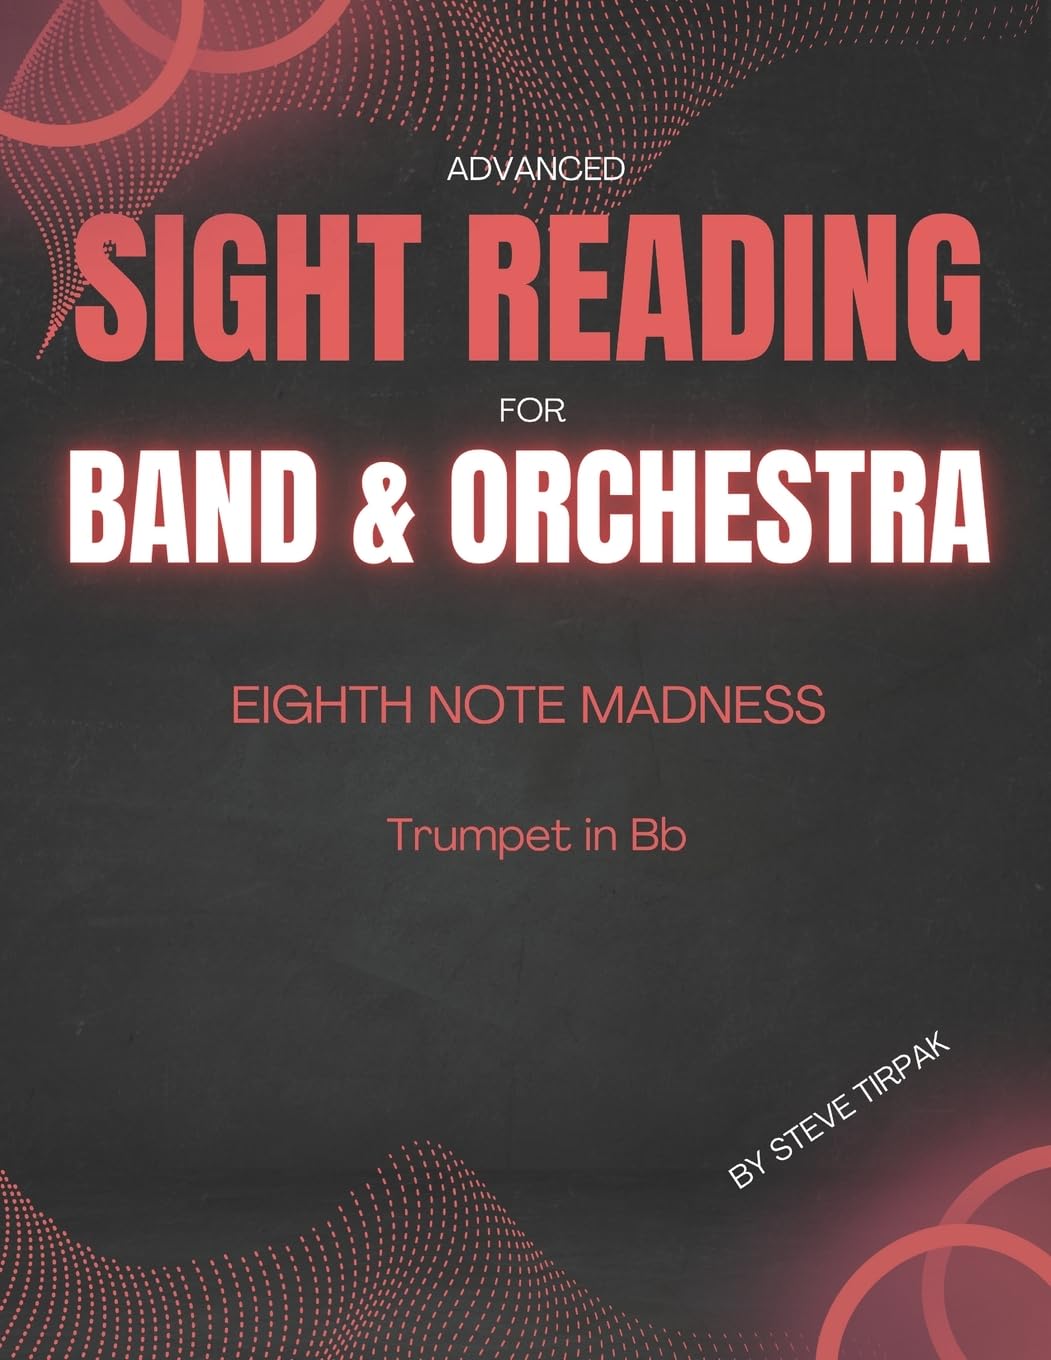 Eighth Note Madness - Trumpet in Bb